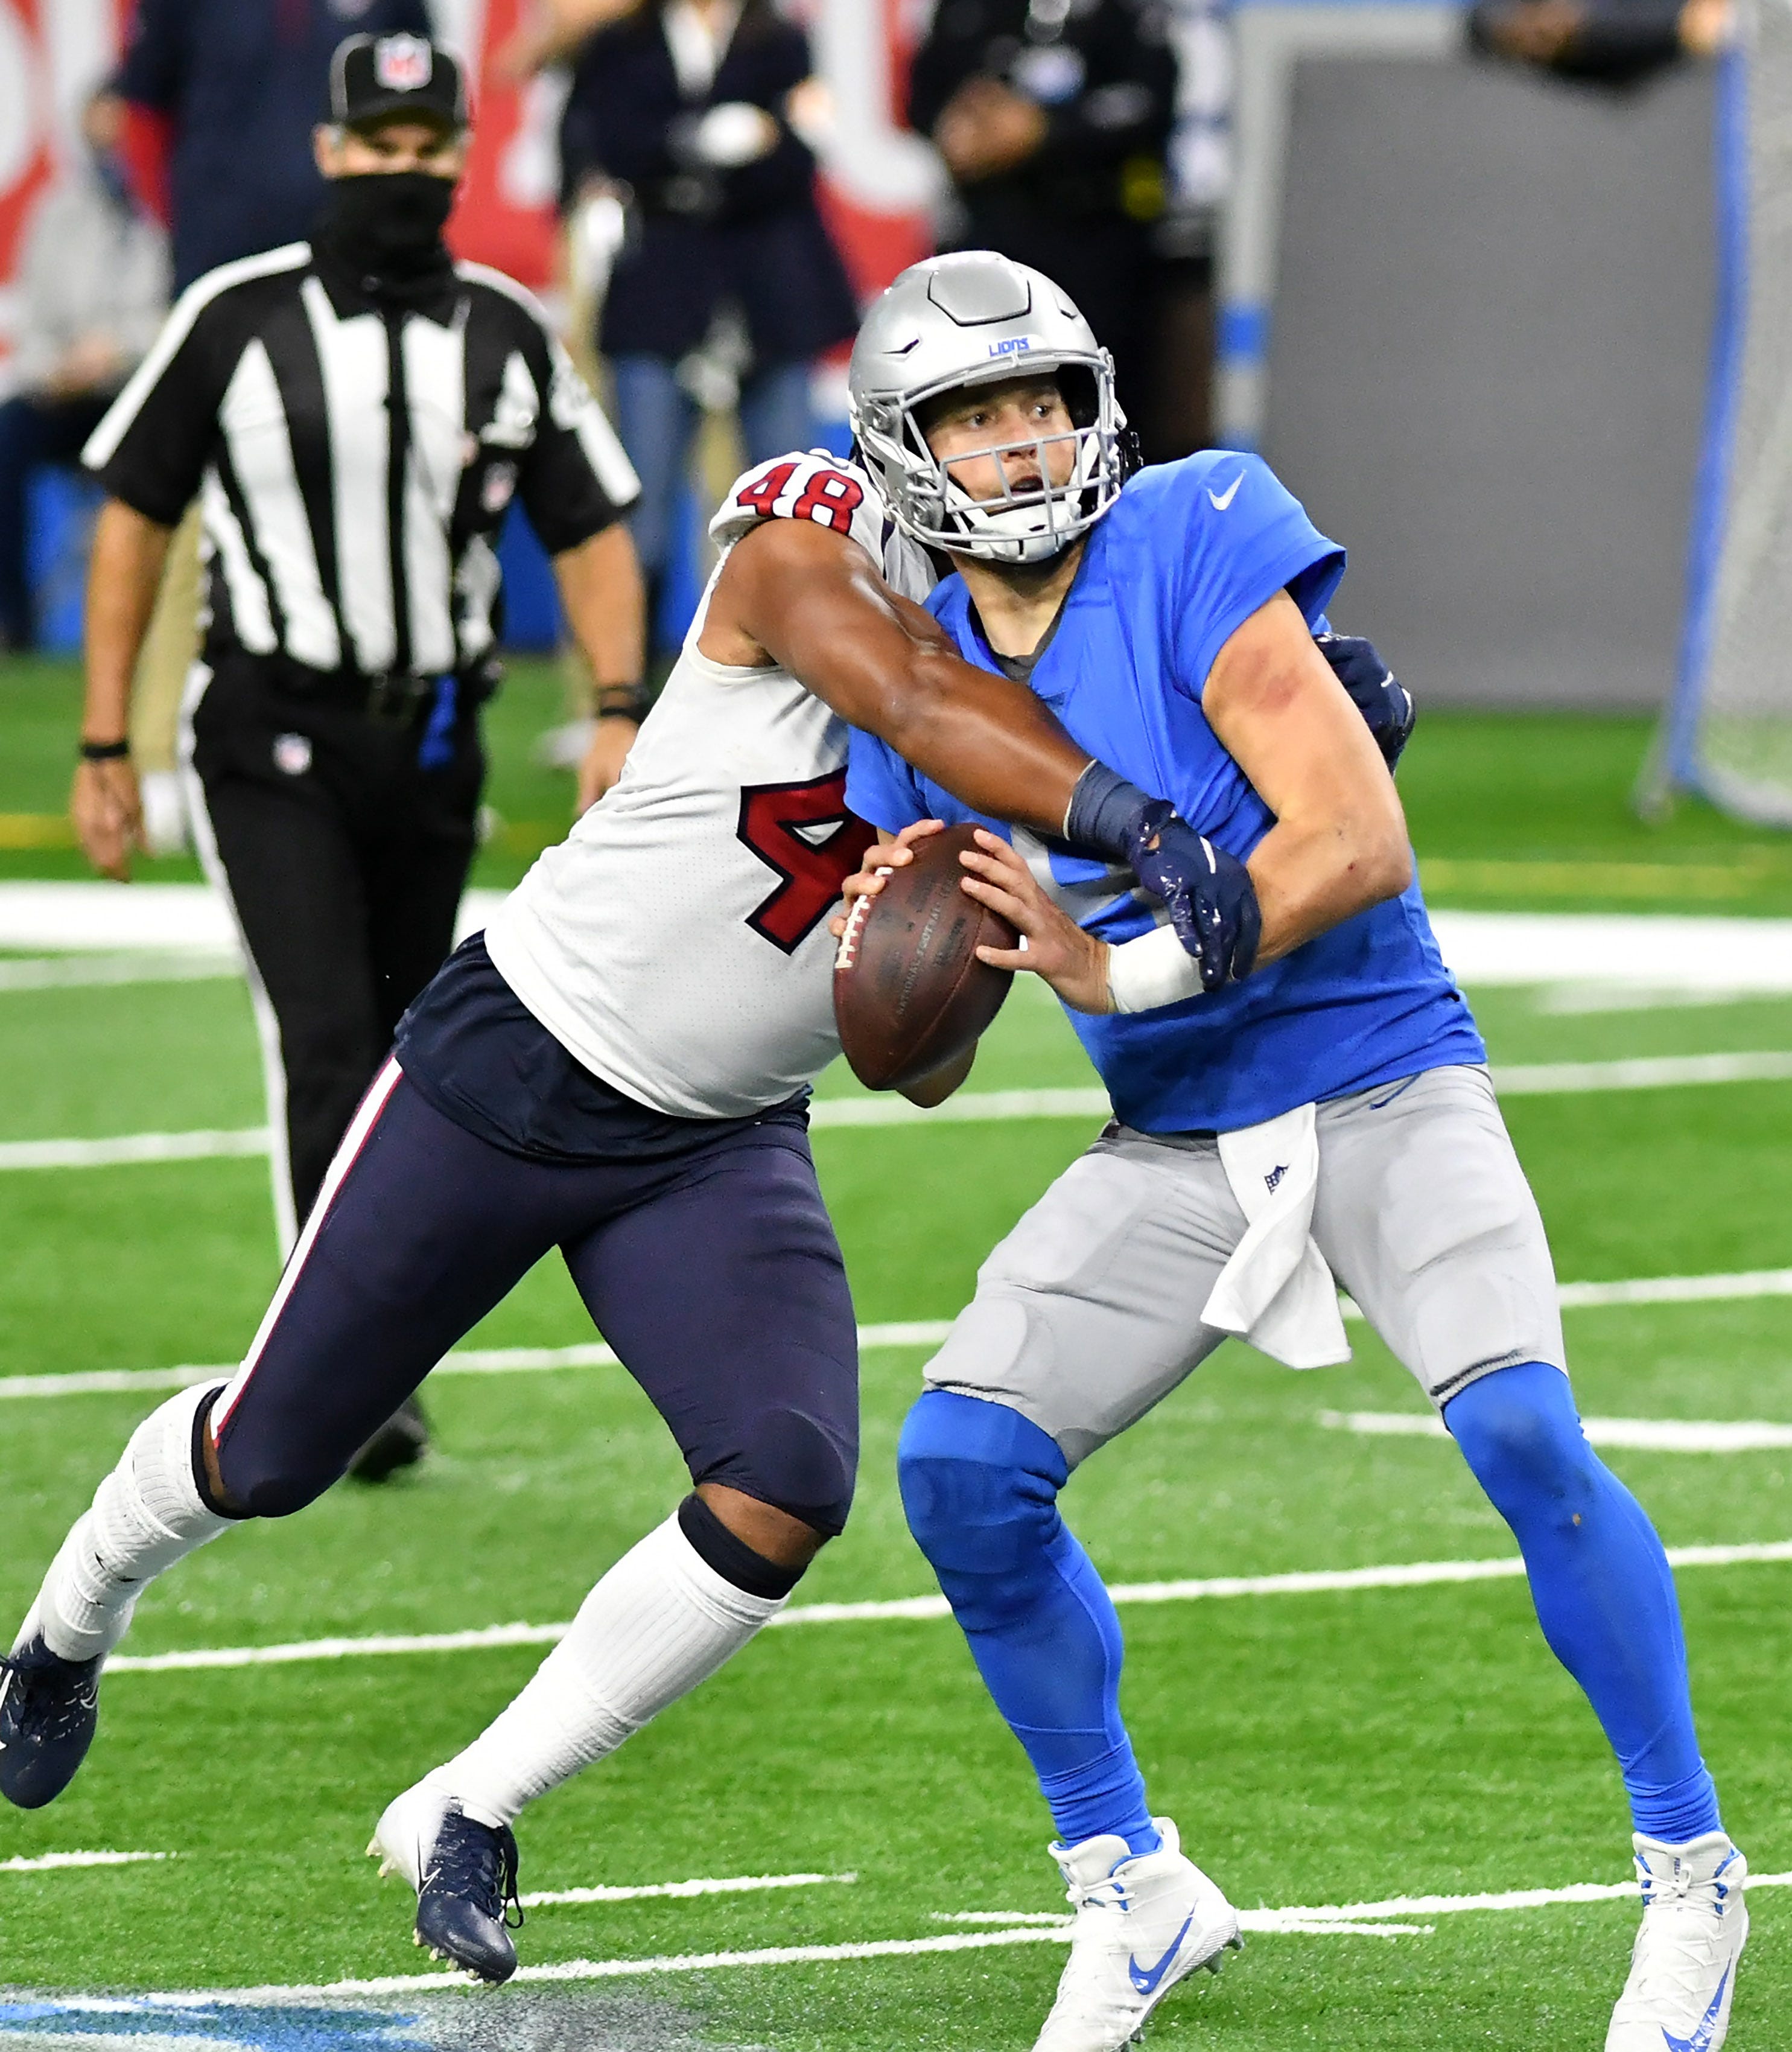 Texans linebacker Nate Hall (48) knocks the ball away from Lions quarterback Matthew Stafford (9) in the fourth quarter.